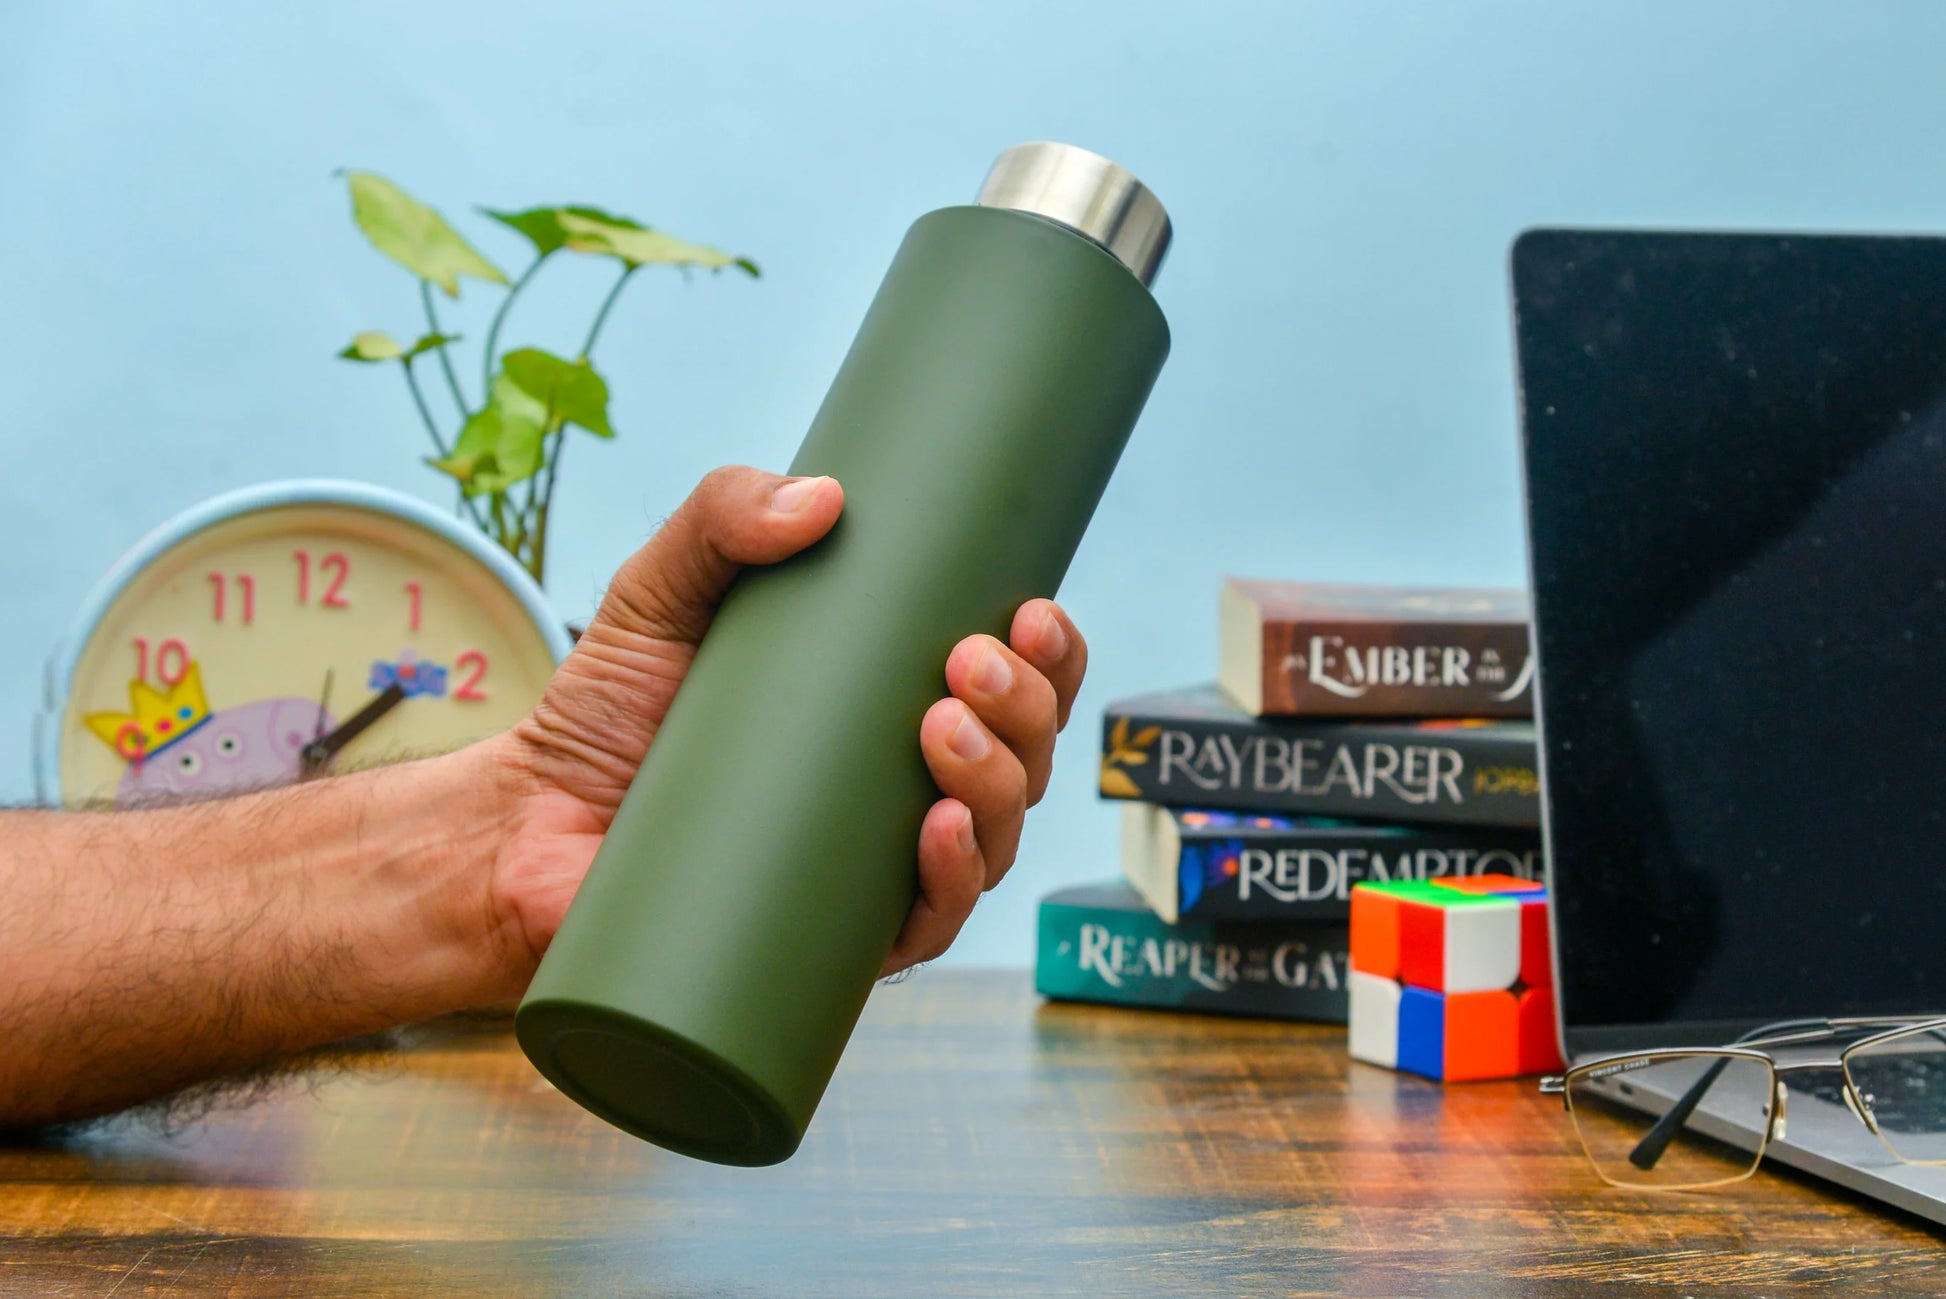 Made from eco friendly and recyclable steel, this premium qality bottle is leak proof and seal tight and speaks class and utility